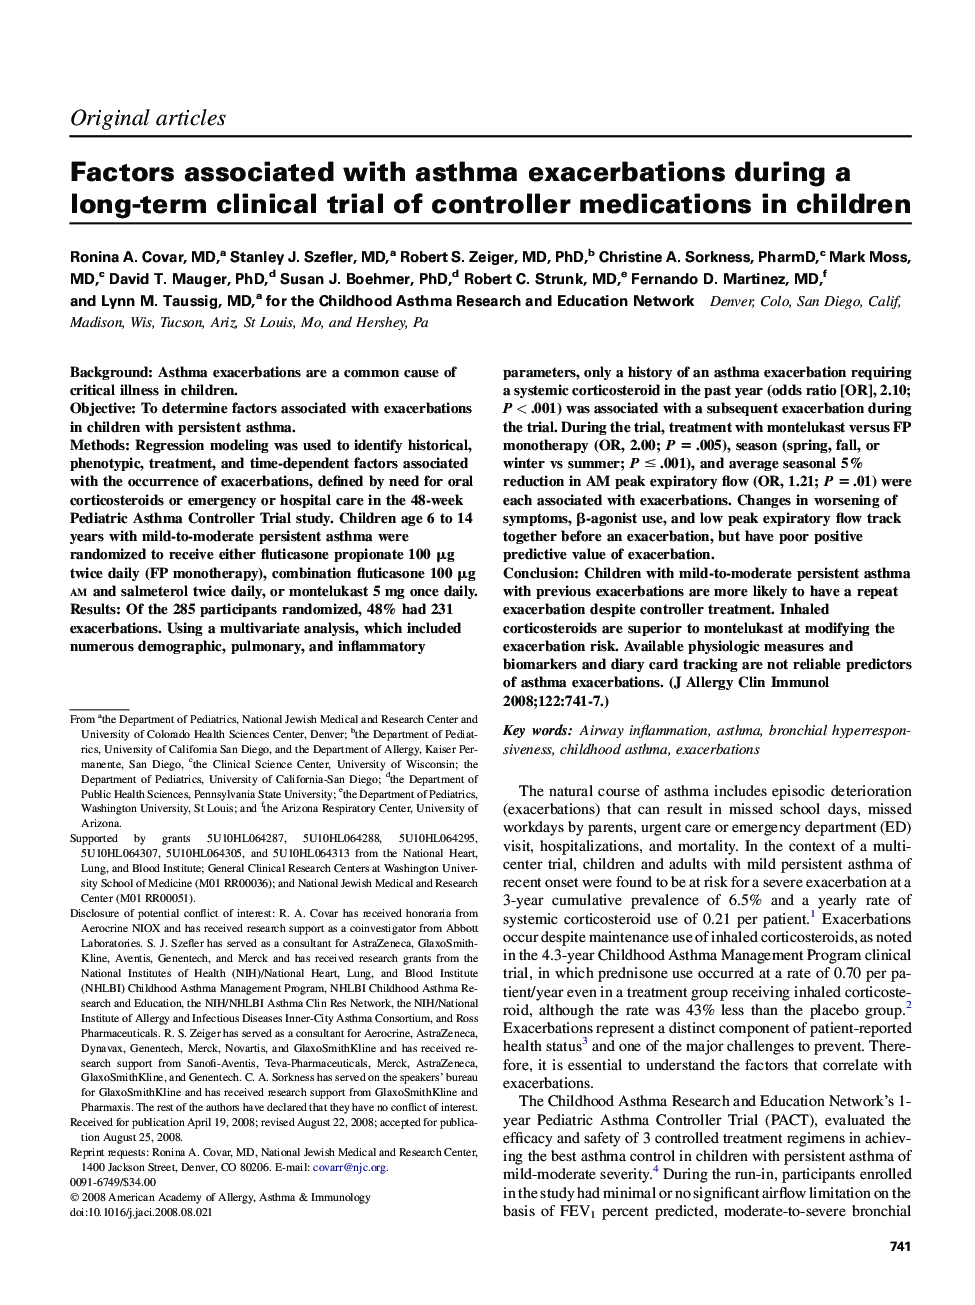 Factors associated with asthma exacerbations during a long-term clinical trial of controller medications in children